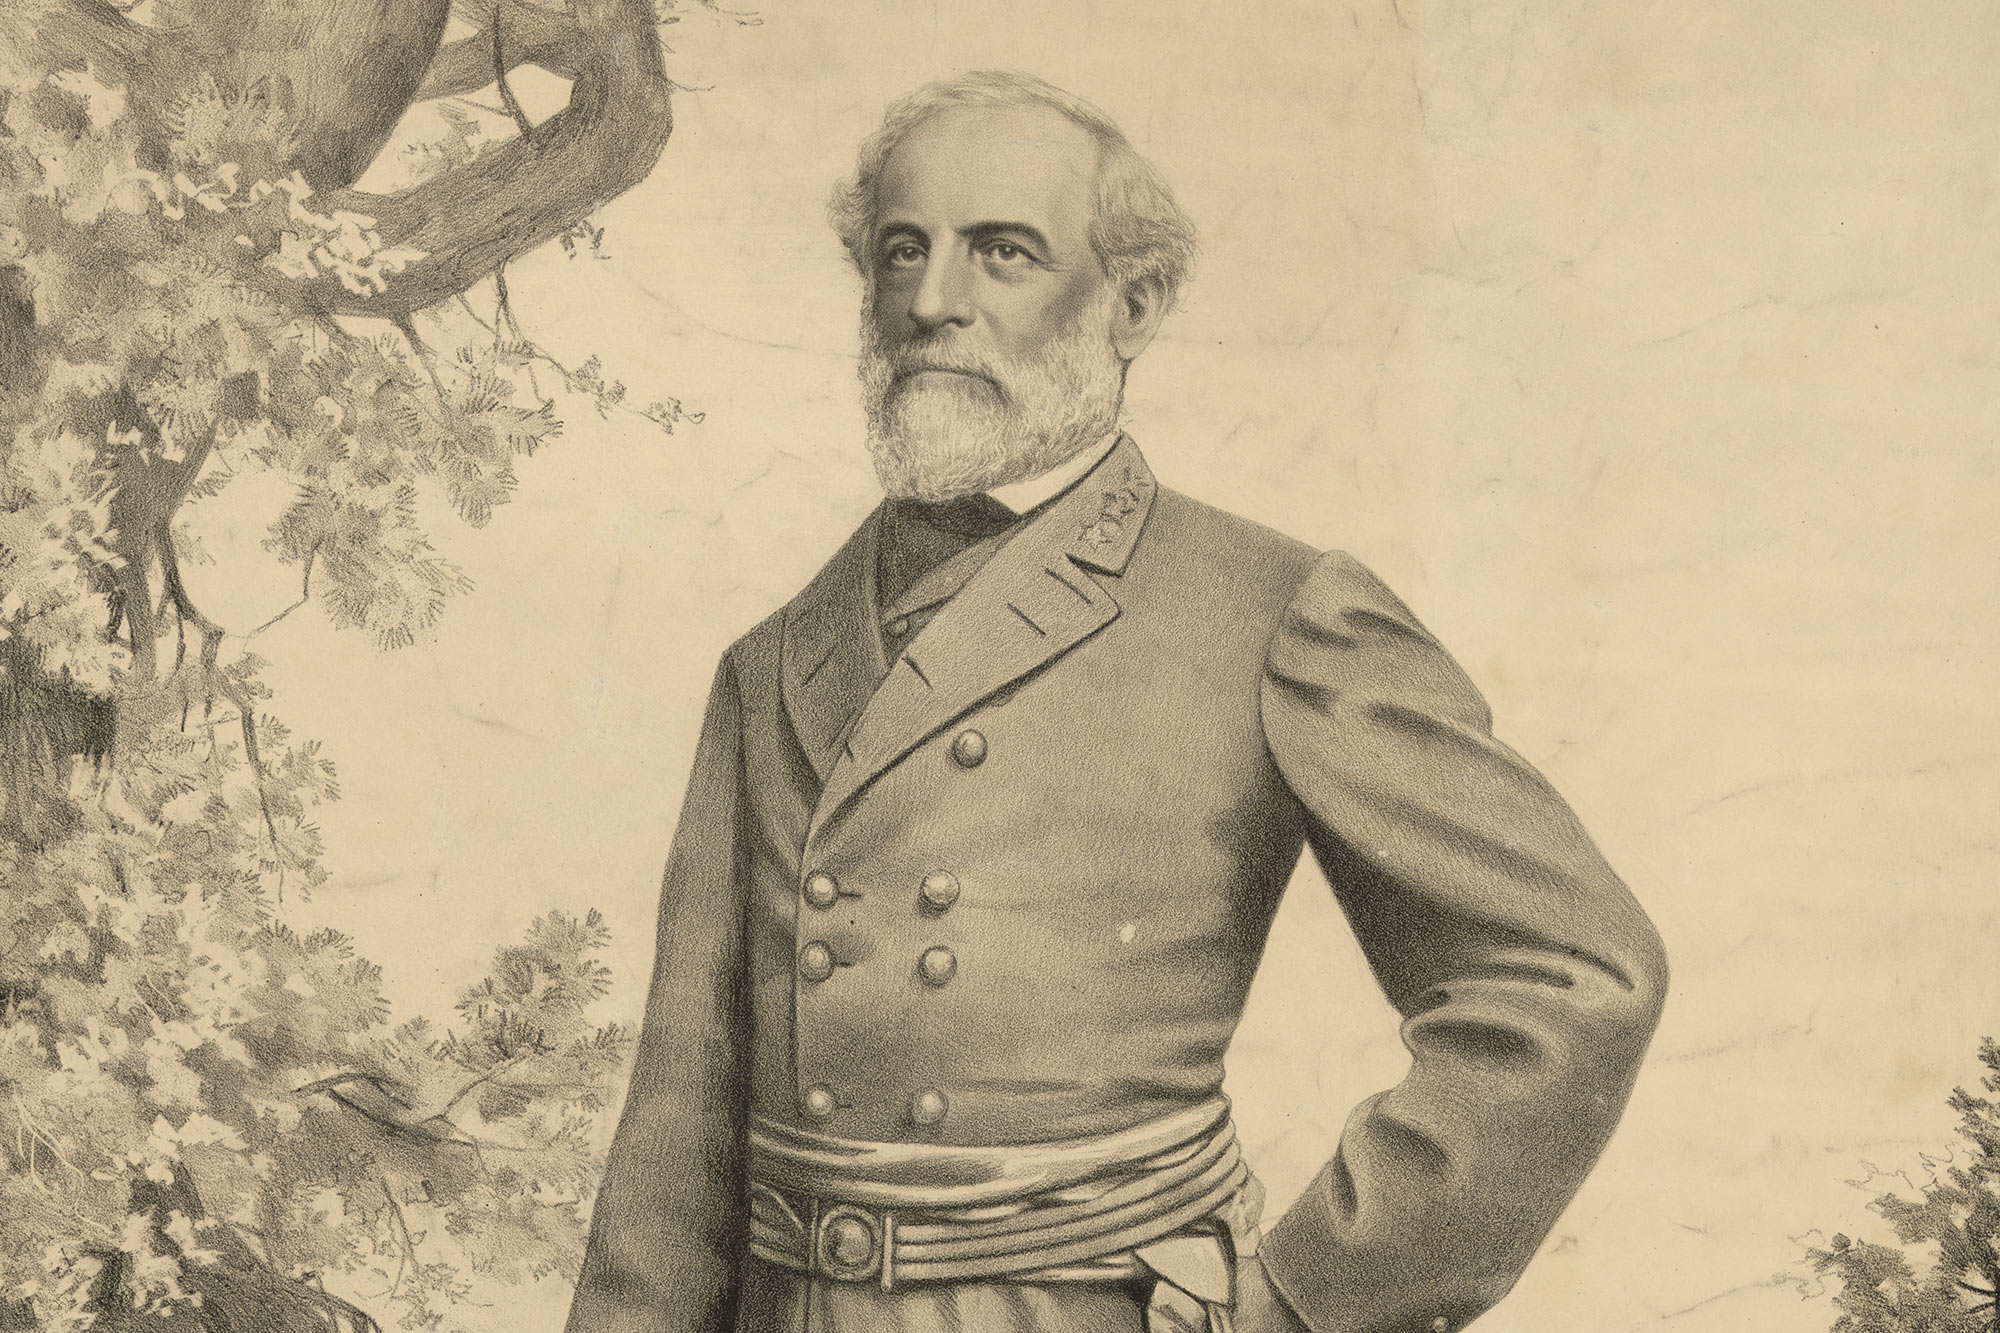 Robert E. Lee | The National Endowment for the Humanities